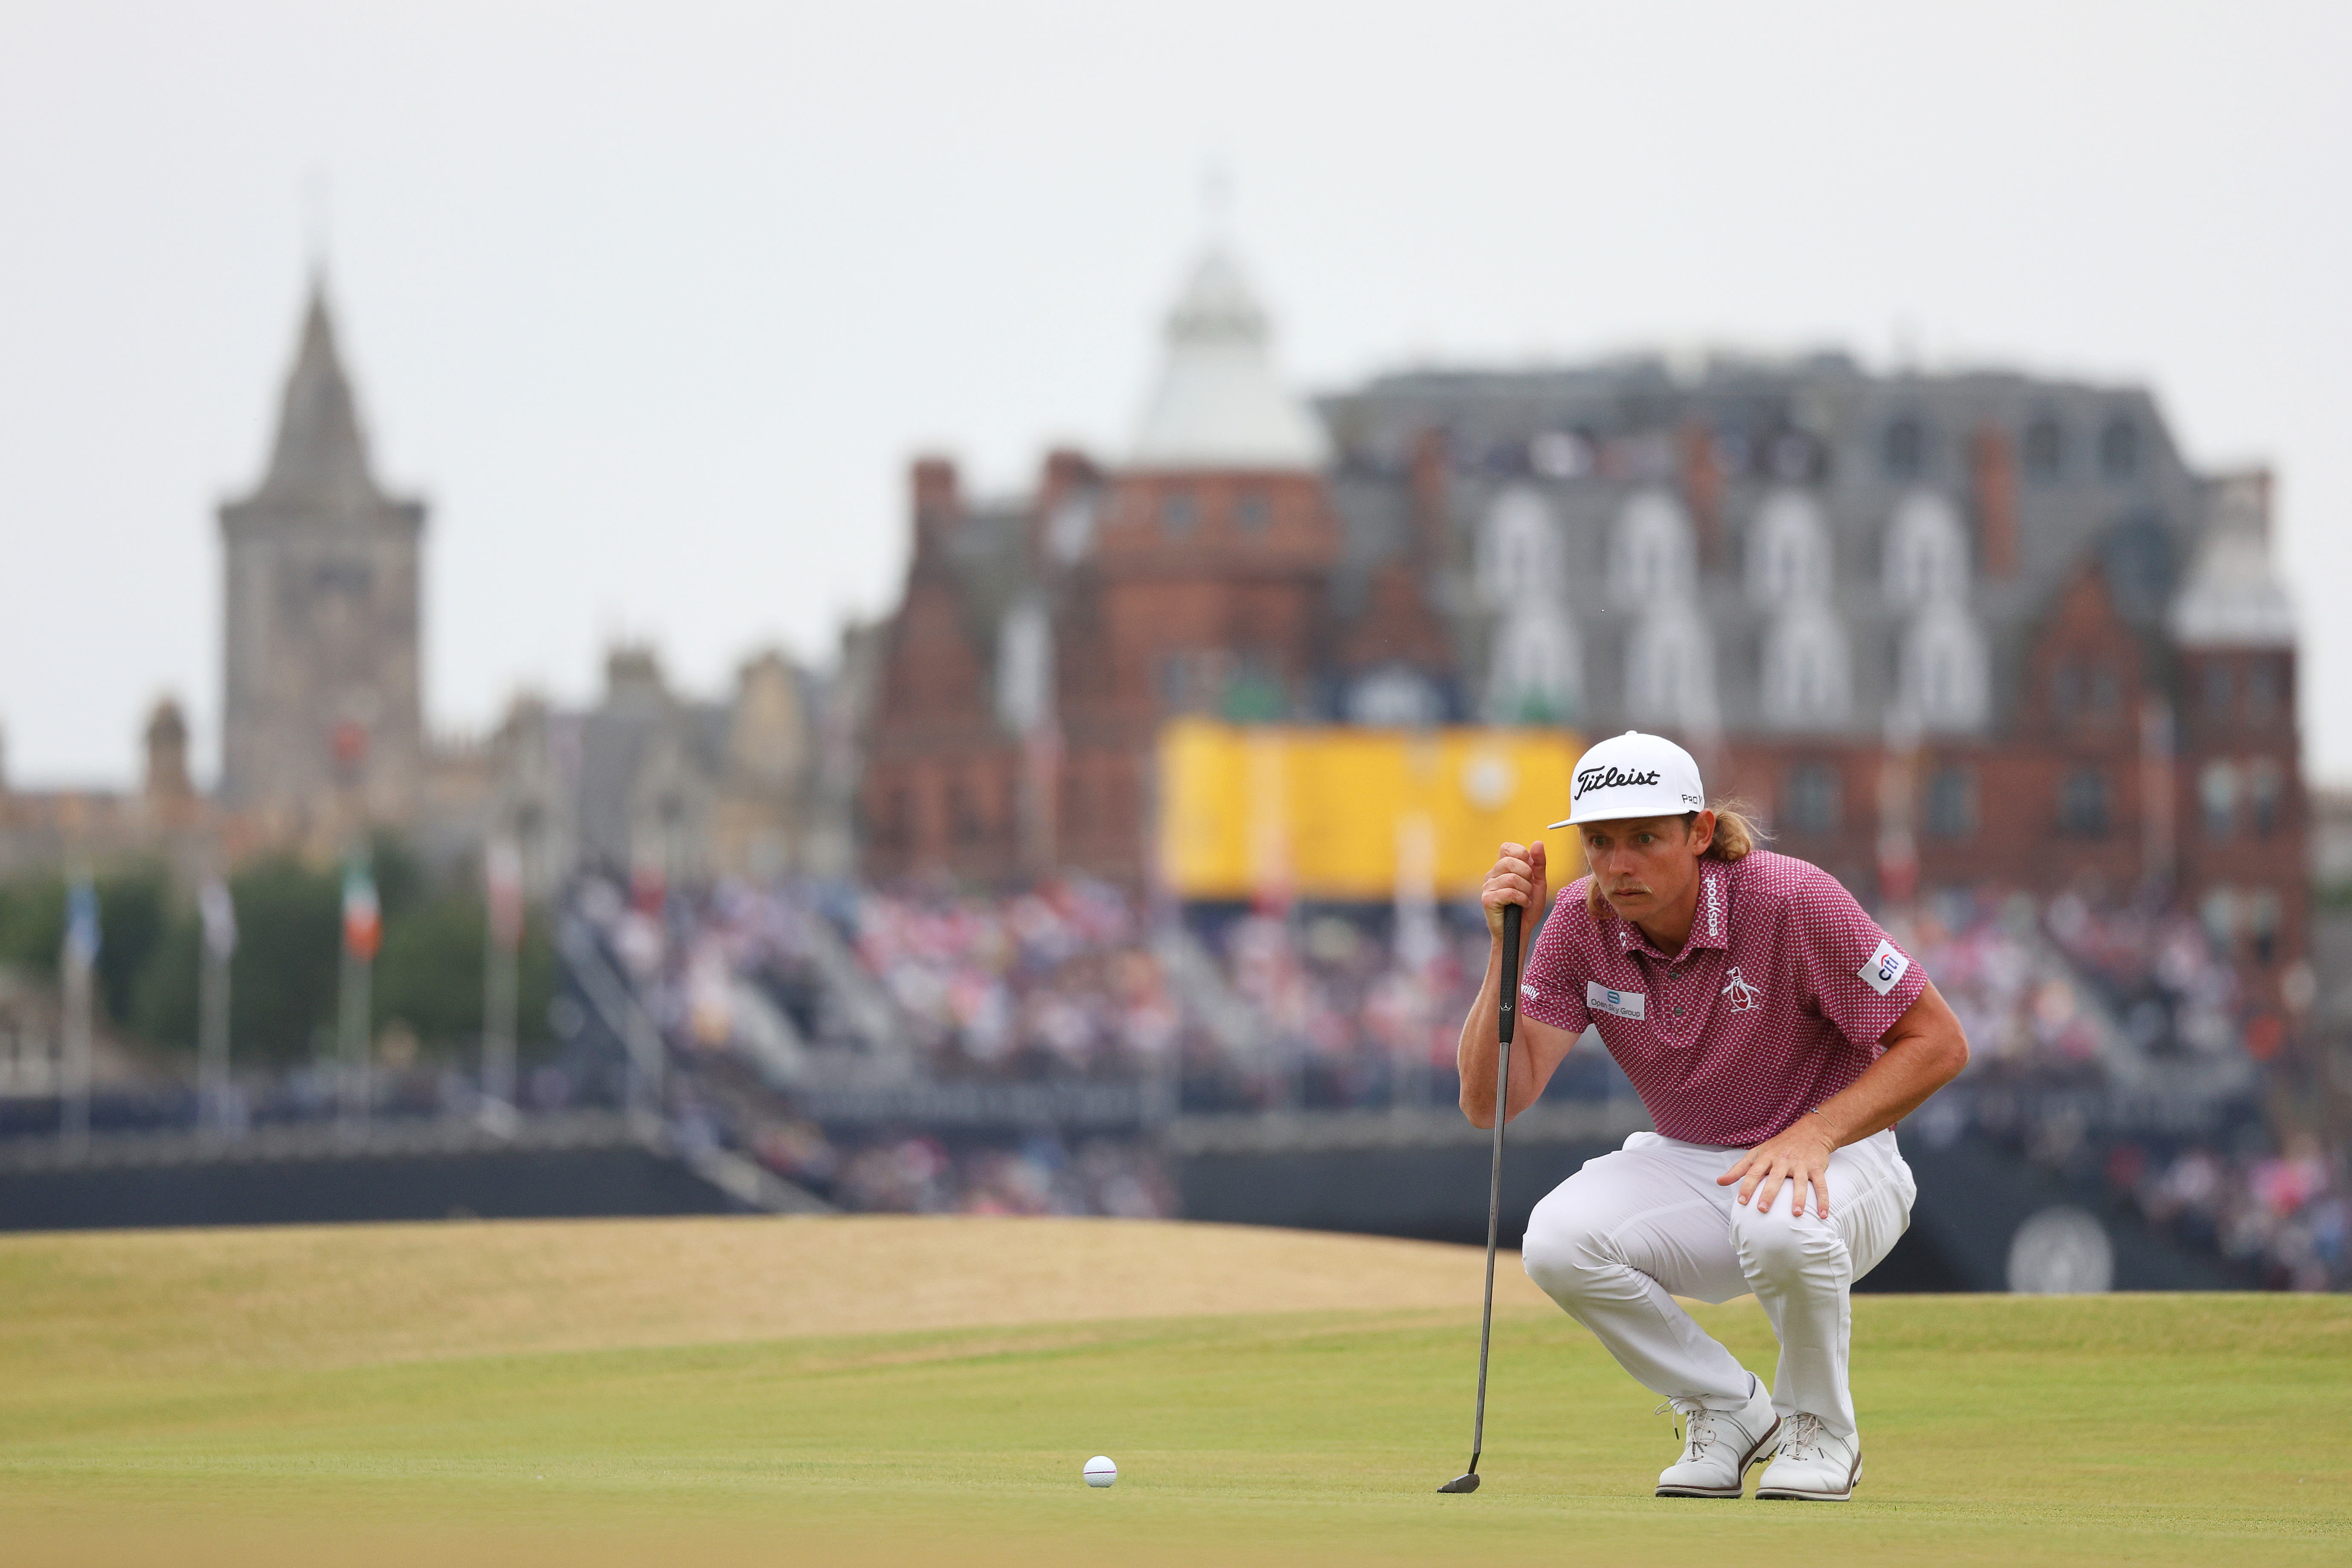 Cameron Smith lines up a putt on the 16th green during the Final Round of The 150th Open at St Andrews Old Course